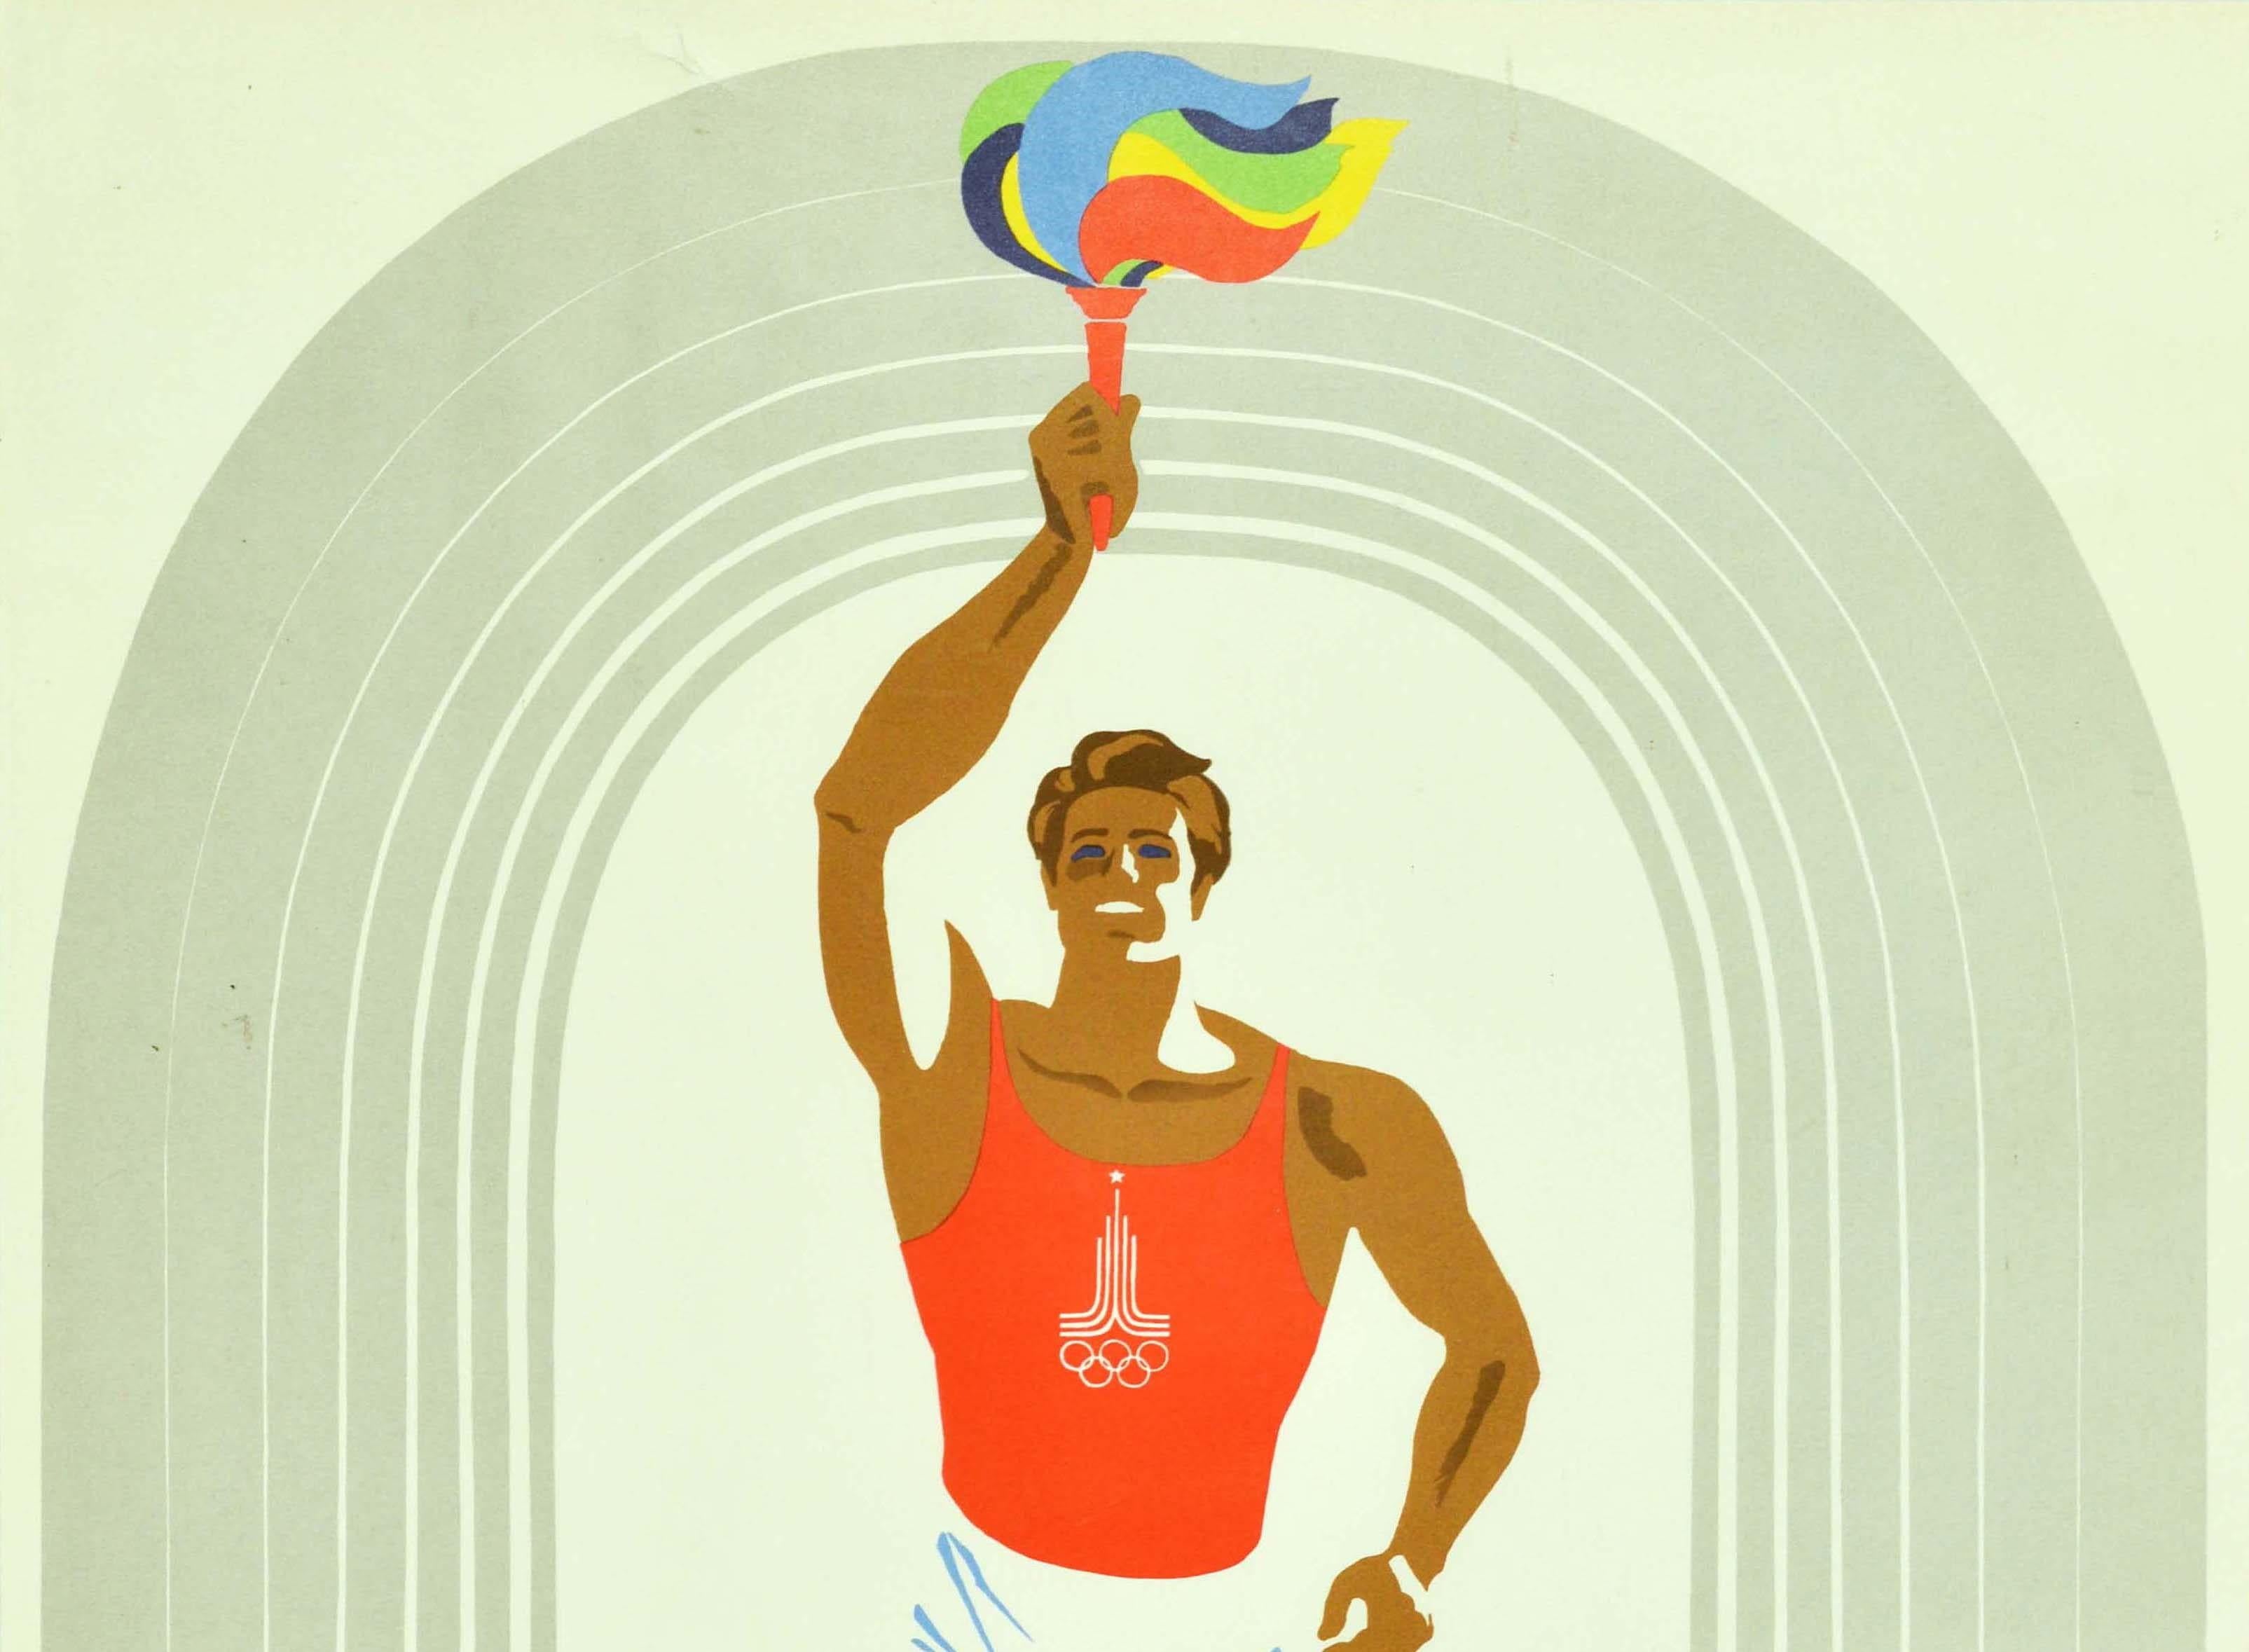 Original vintage sport poster for the 1980 Olympic Games in Moscow Russia featuring an athlete in a red sports top with the Moscow Olympics logo on it, running towards the viewer whilst holding the Olympic torch with the flame in the Olympic